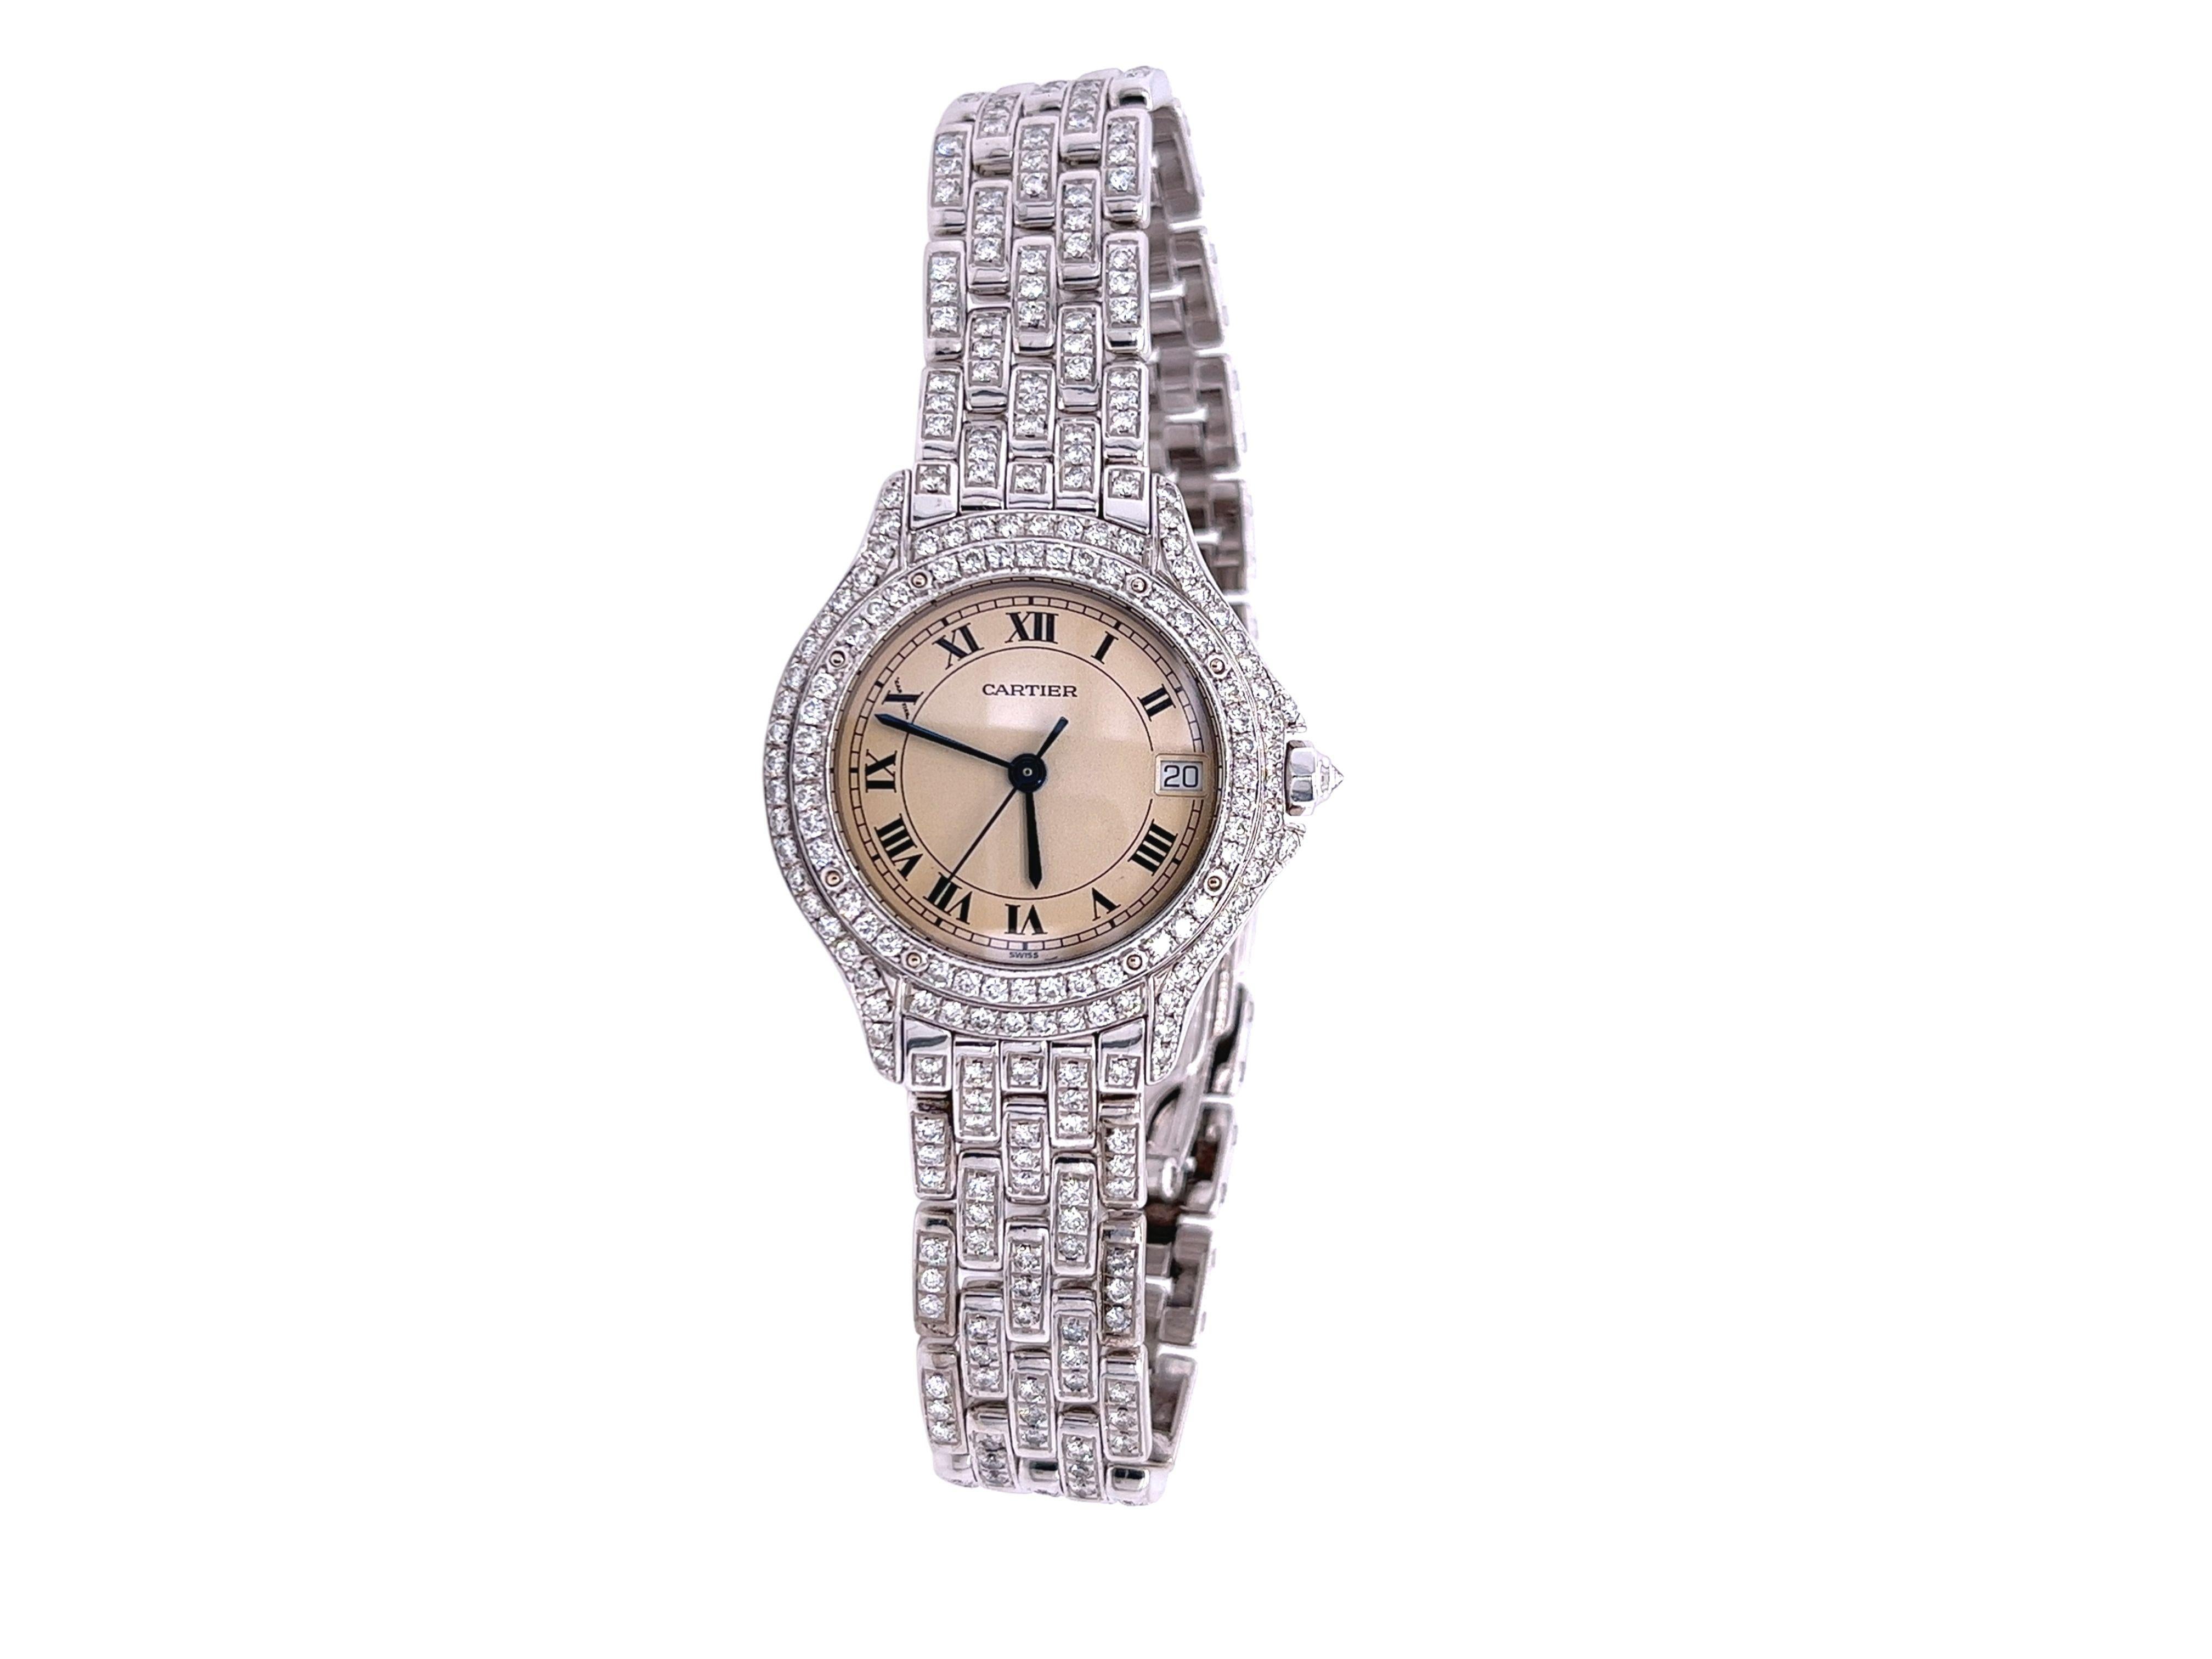 18K white gold Cartier quartz movement wrist-watch with diamonds. This Watch features a caliber 687, date bubble, and  328 round brilliant diamonds of approximately 3.28 carats, Clarity-VS2, Color-G. This vintage diamond Cartier watch is a legendary